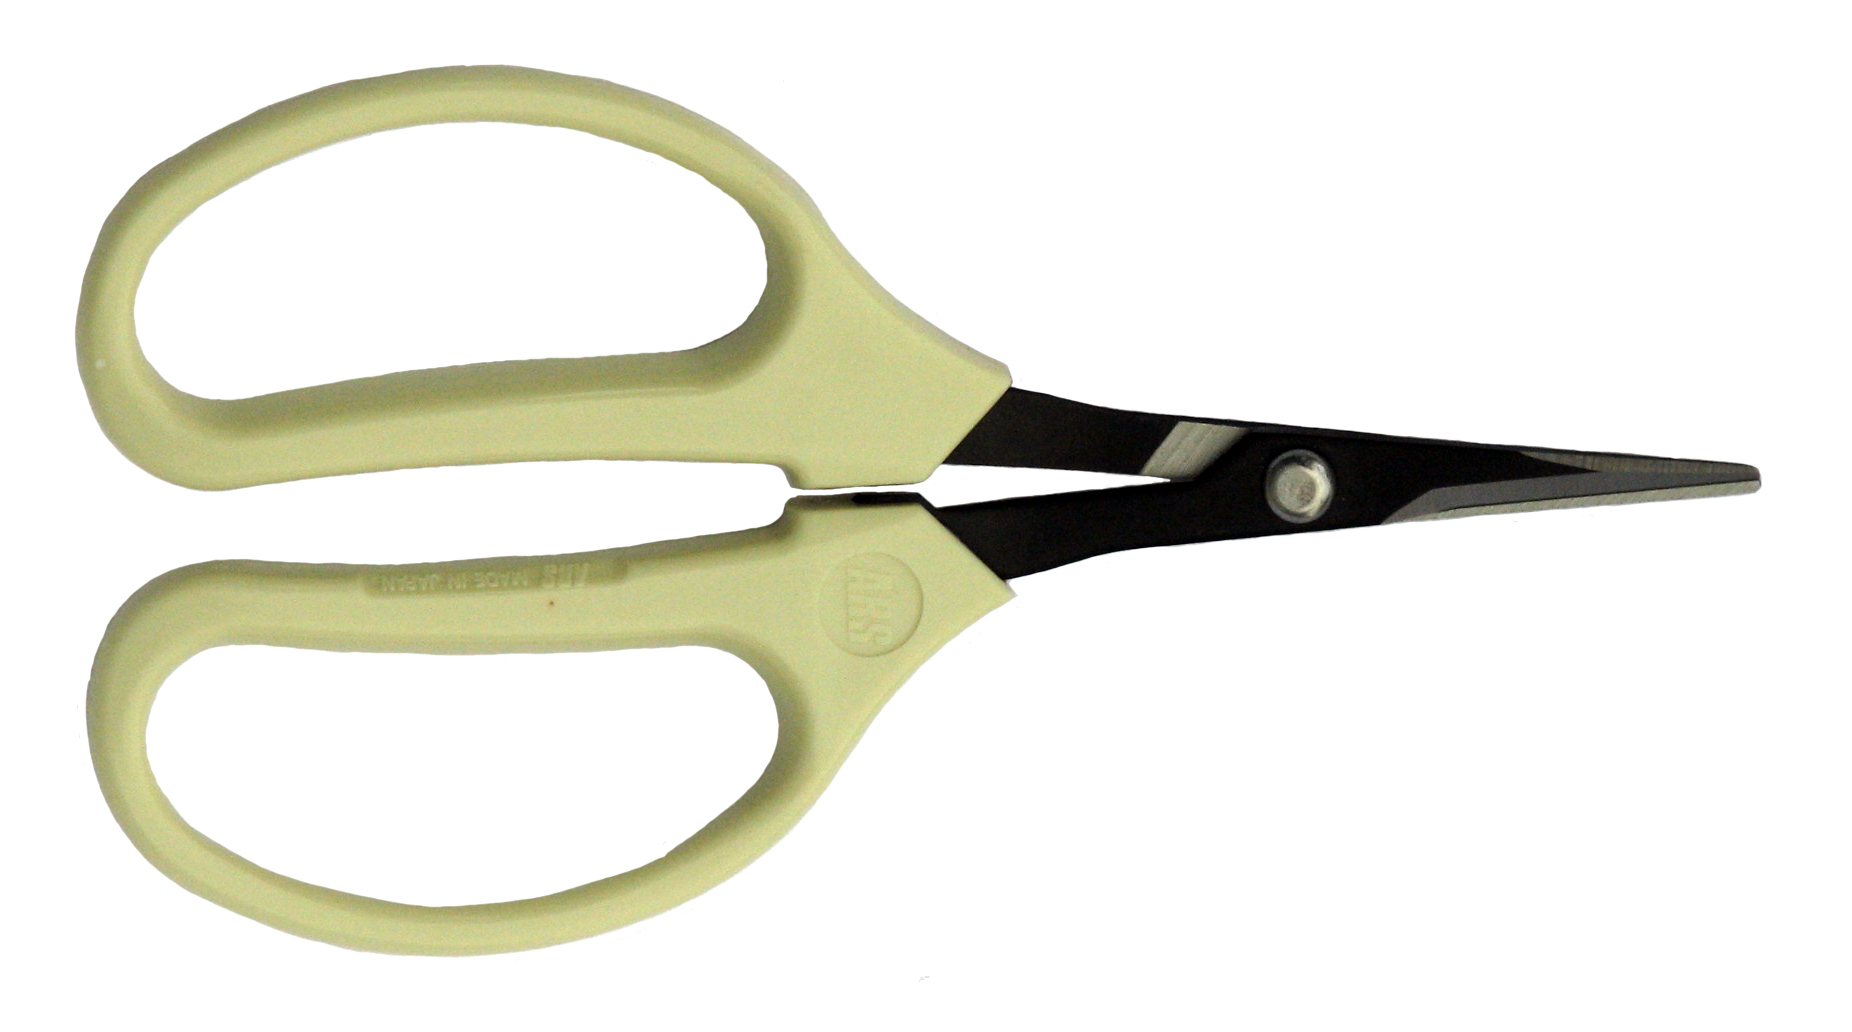 Picture for ARS Cultivation Scissors, Angled Carbon Steel Blade